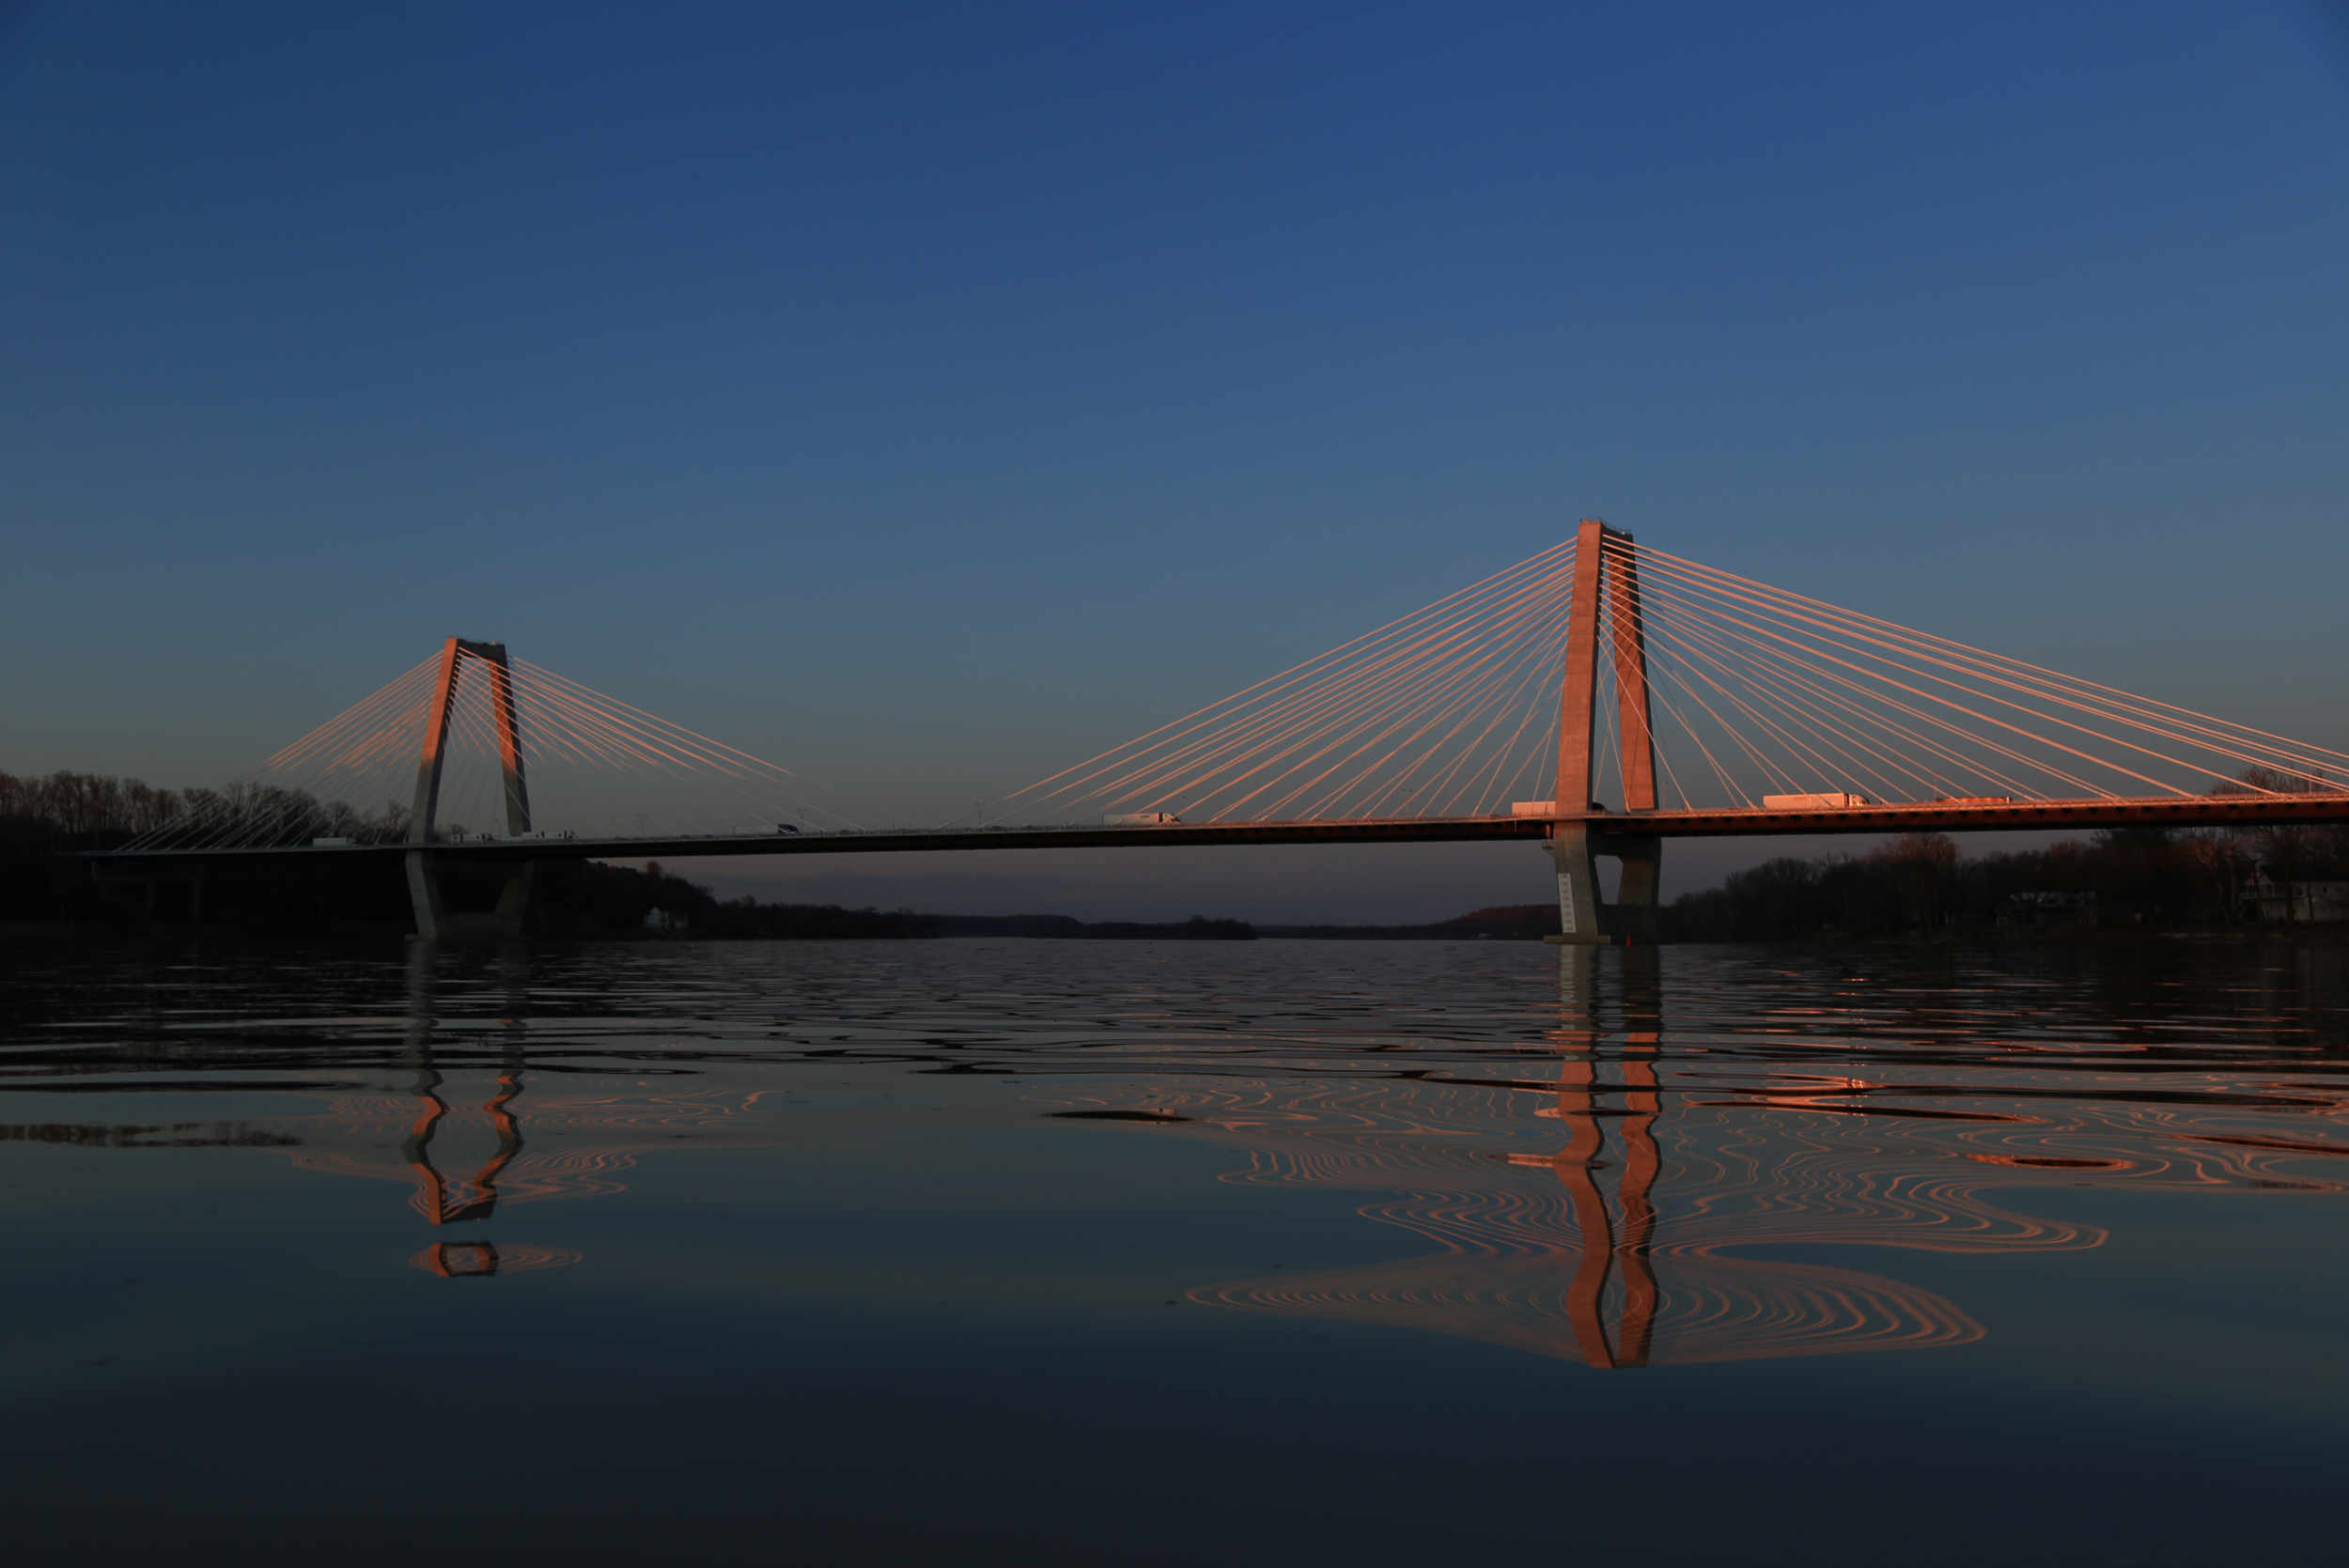 The East End Bridge in north Louisville during an Ohio River sunset. (Photo by Ryan Van Velzer/WFPL)